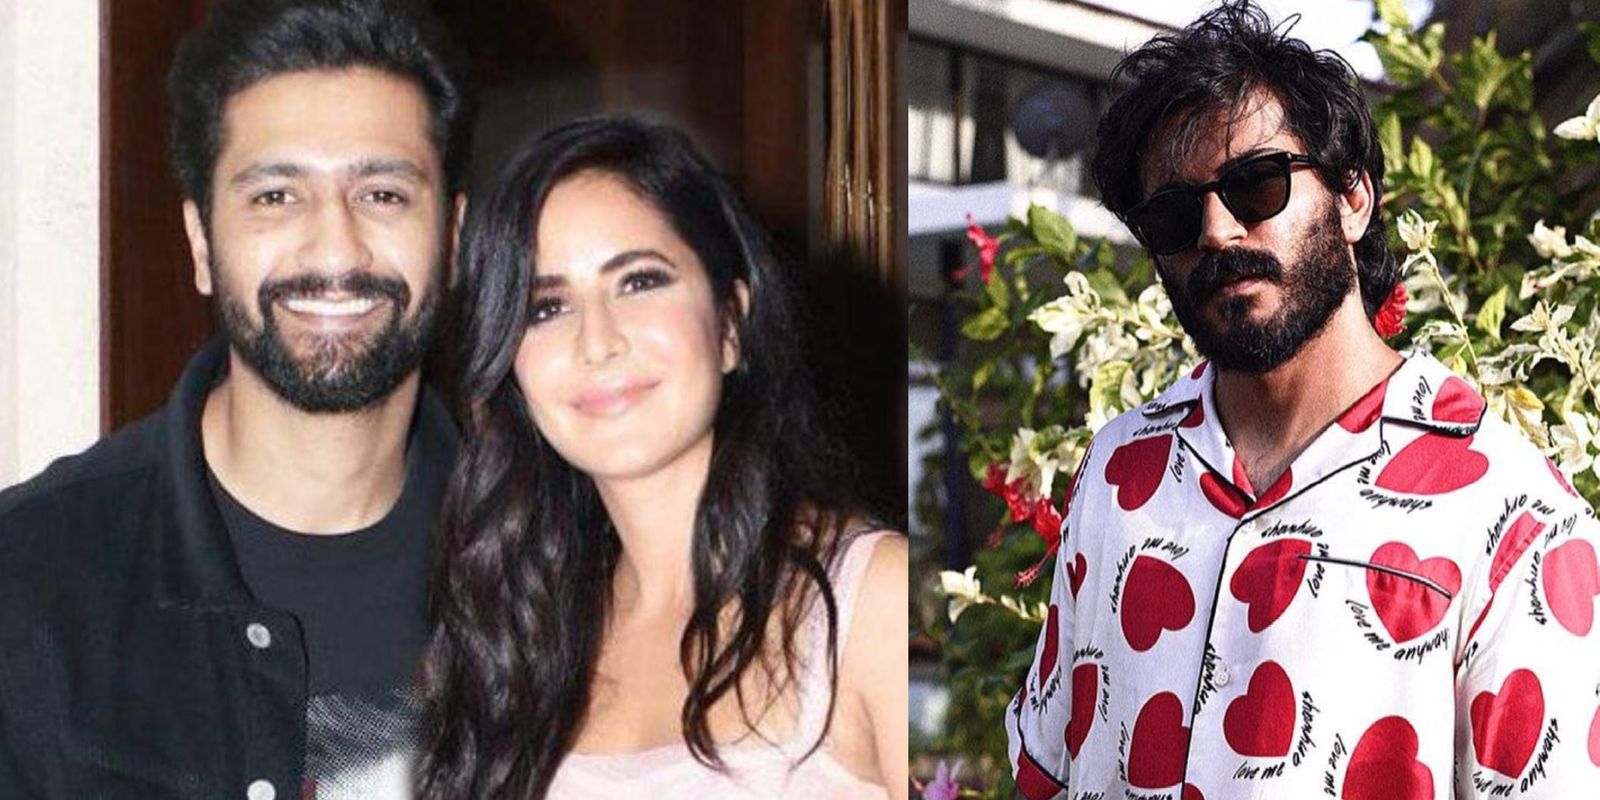 Katrina Kaif is upset with Harsh Varrdhan Kapoor for going public with her and Vicky Kaushal’s relationship